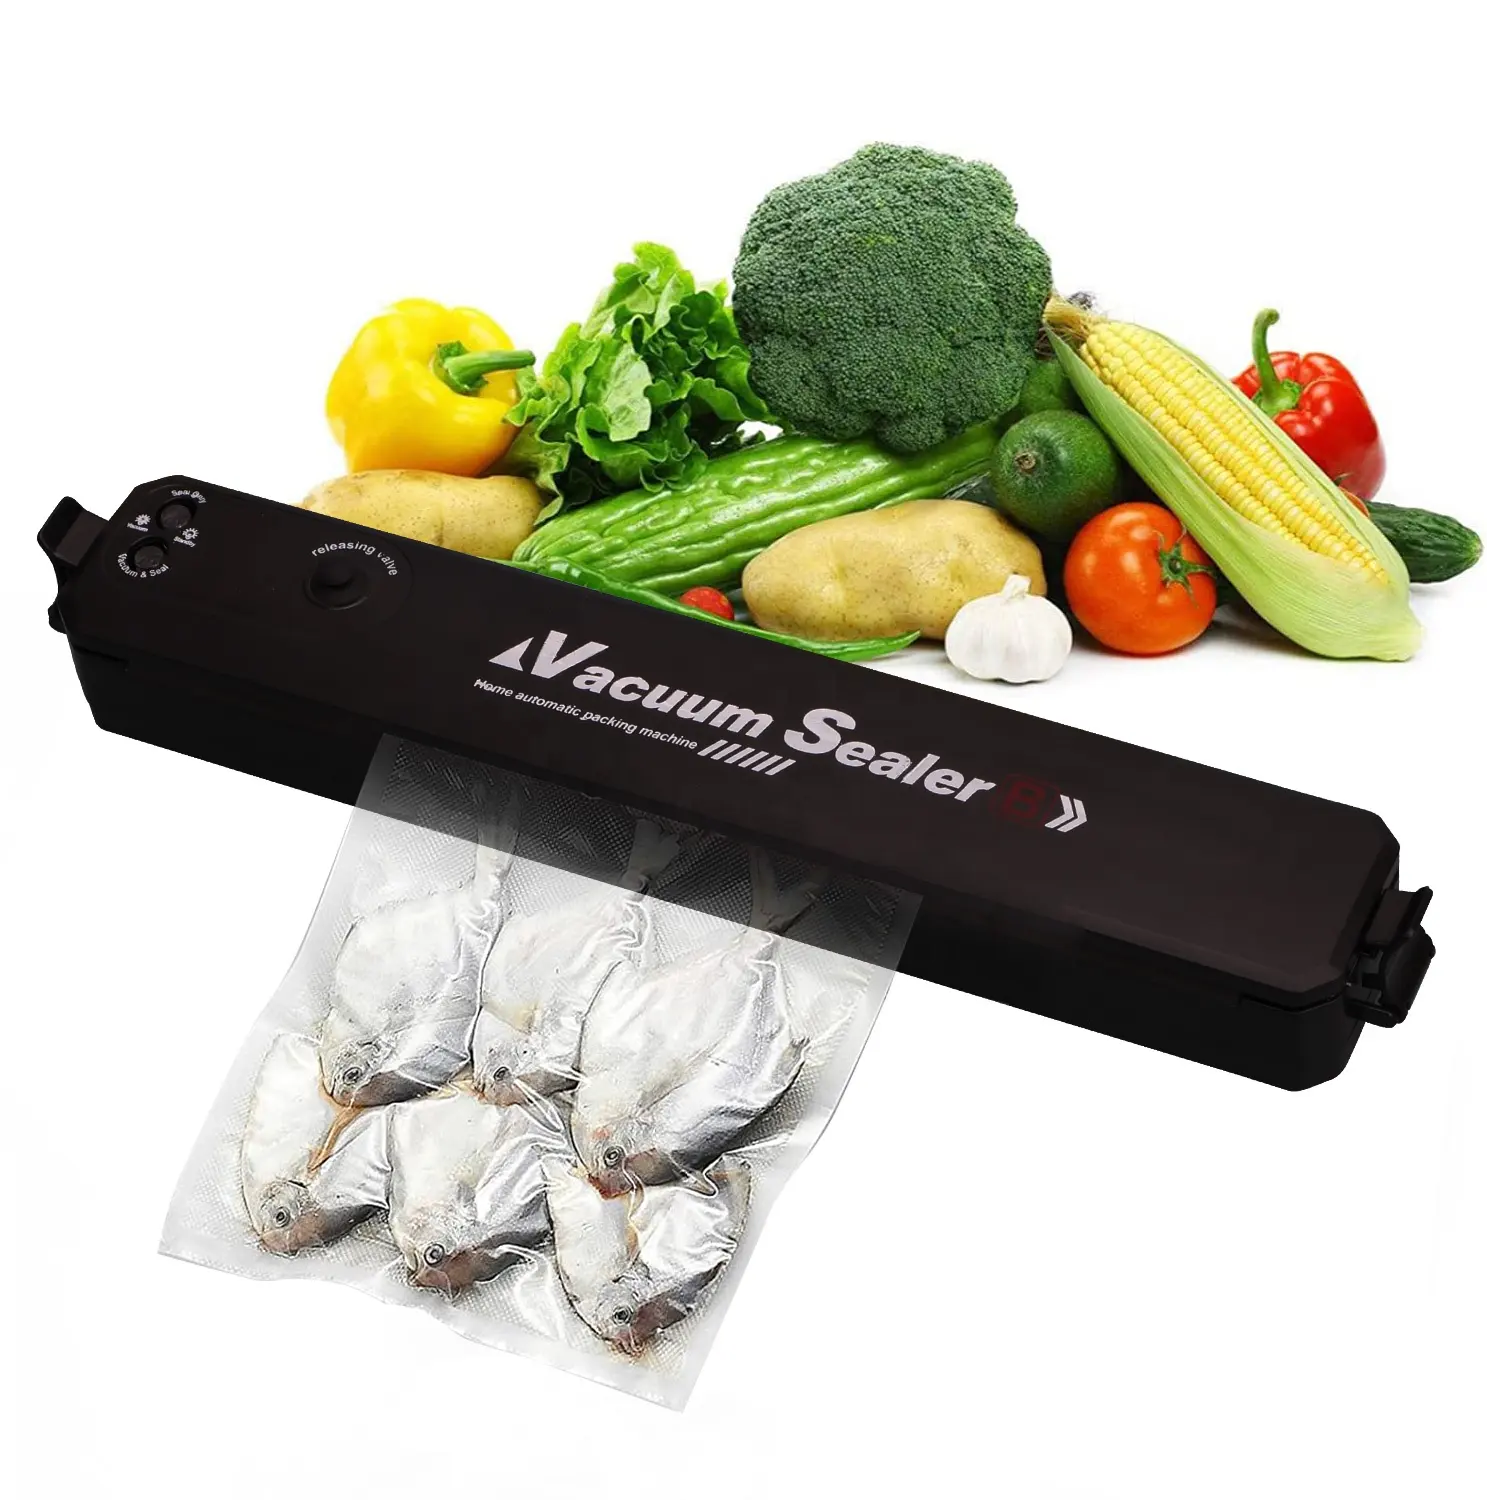 Hot Vacuum Sealer Machine Automatic Food Sealer for Food Savers Dry & Moist Modes Compact Design Vacuum Packing Machine